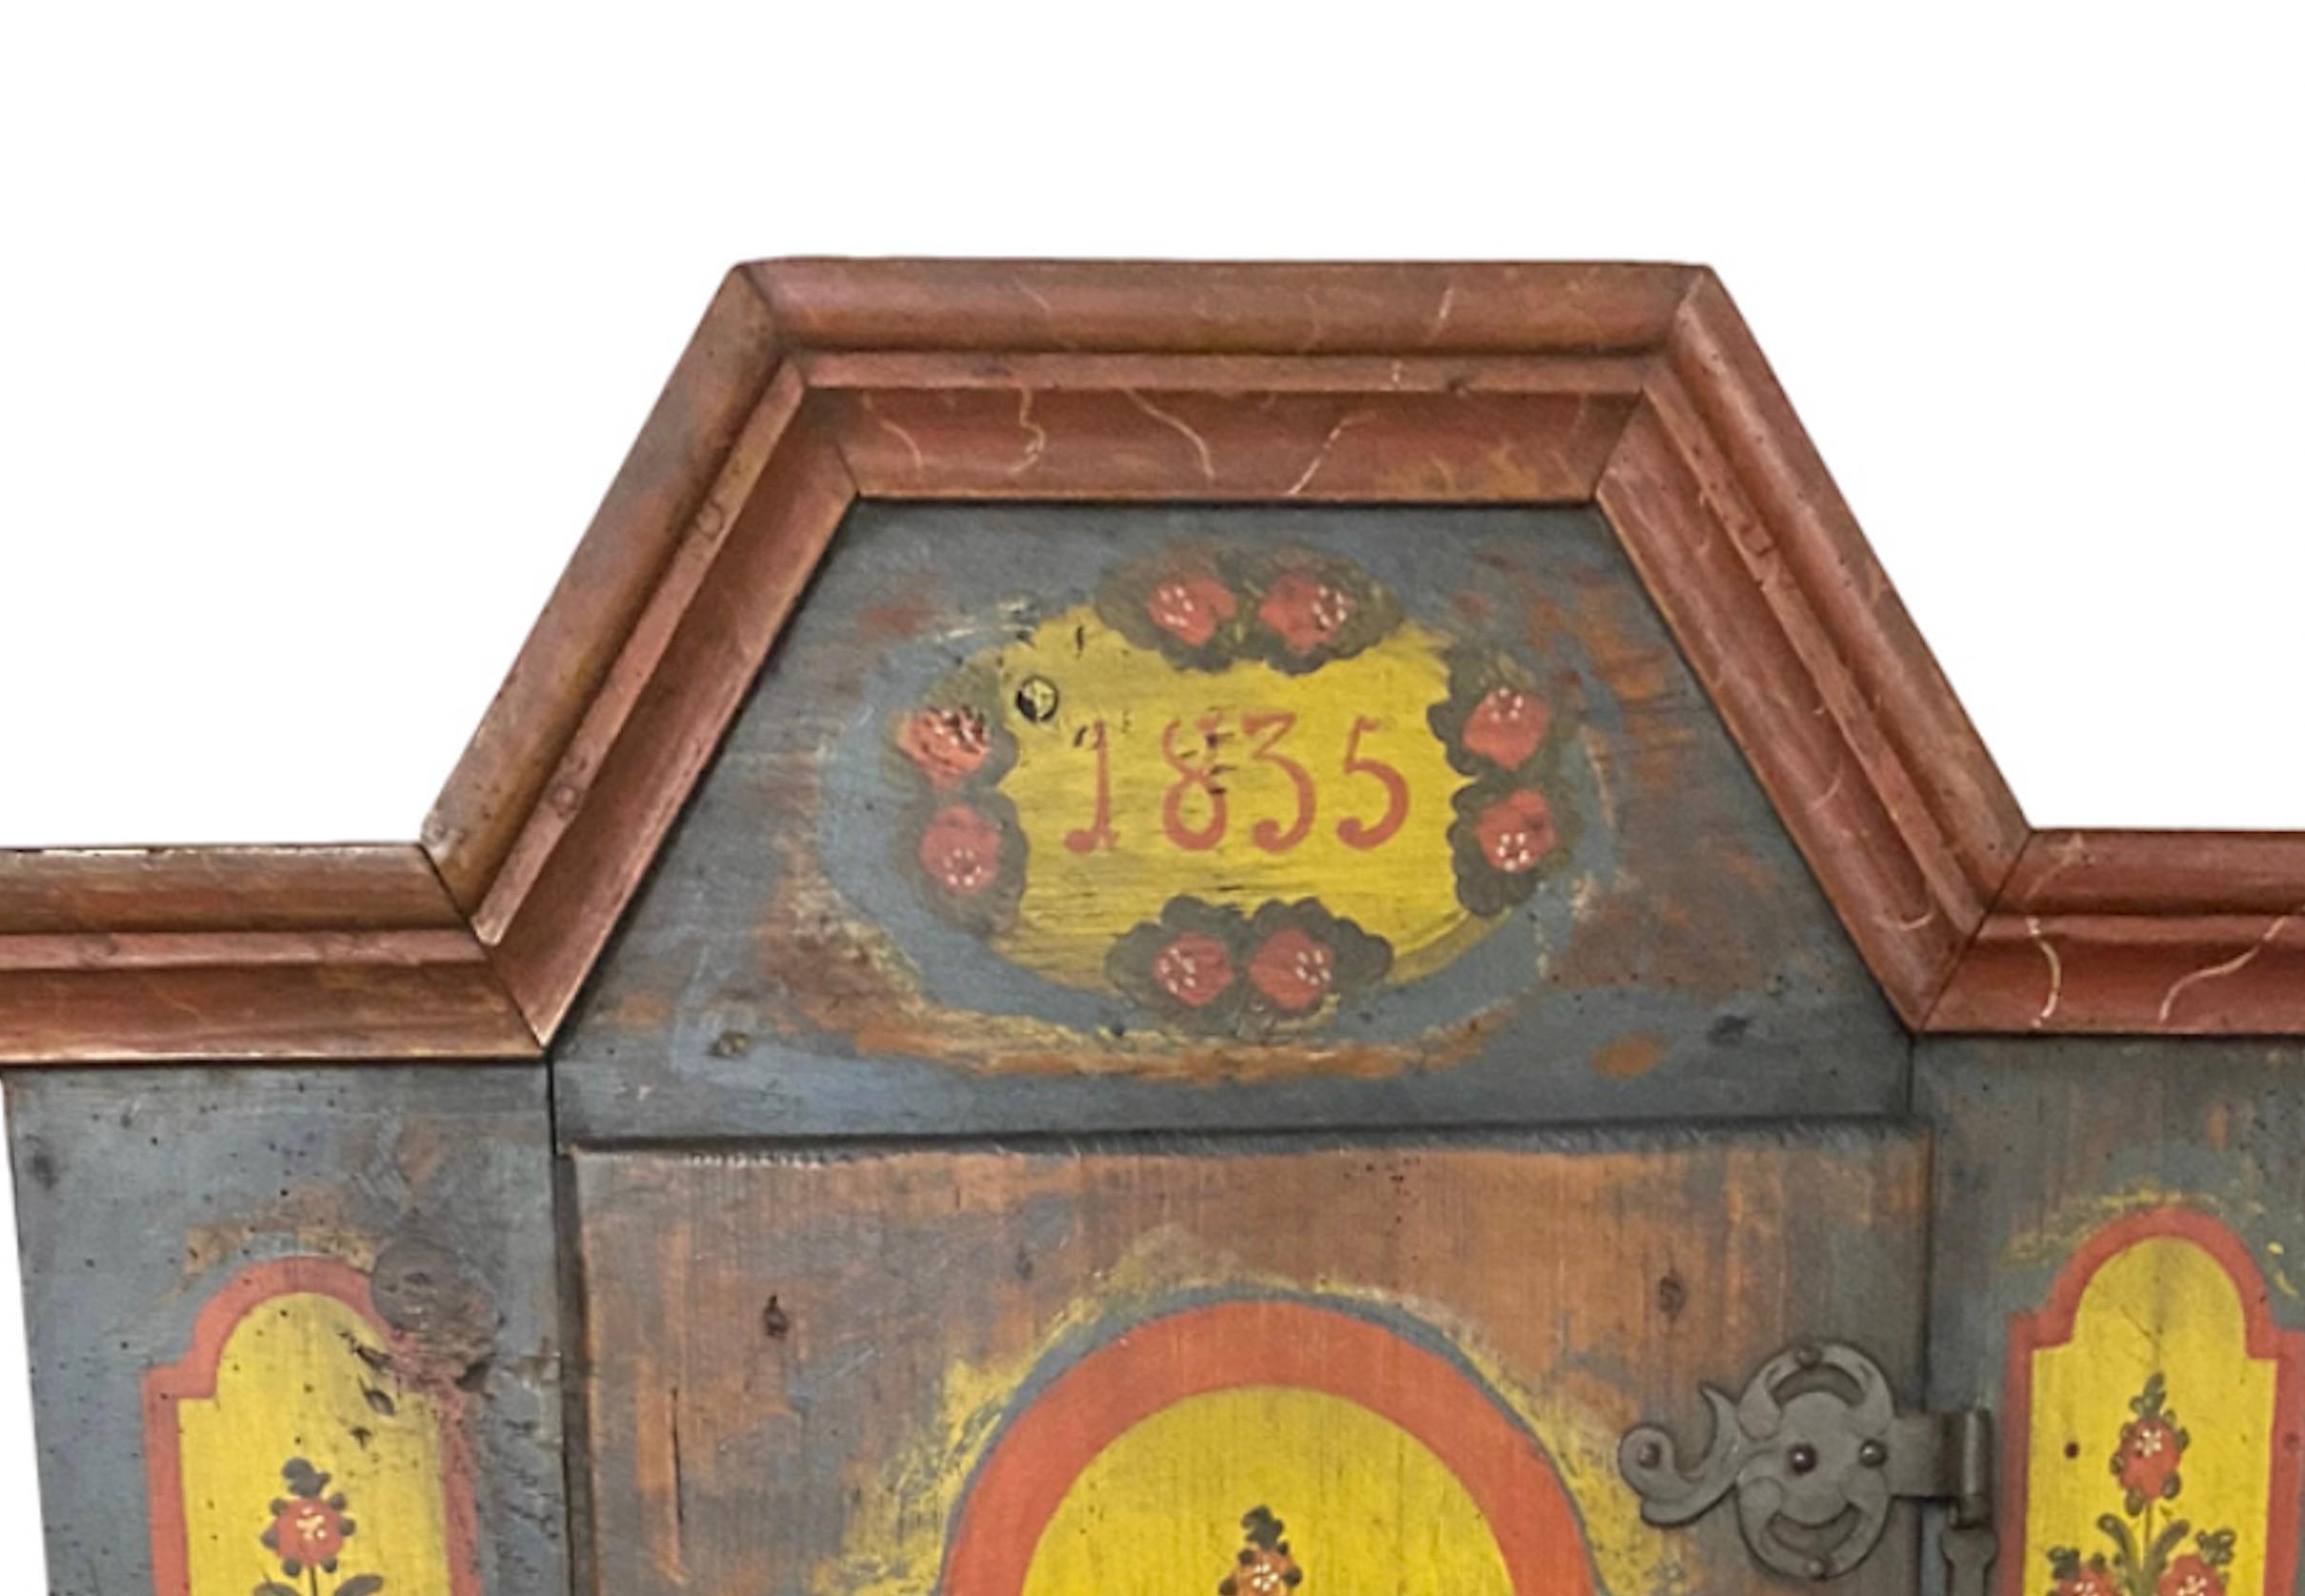 Hand painted blue cupboard with flowers and red cornice

Dated “1835”

Part of a pair but can be sold individually

70.5″H x 31″W x 16″D